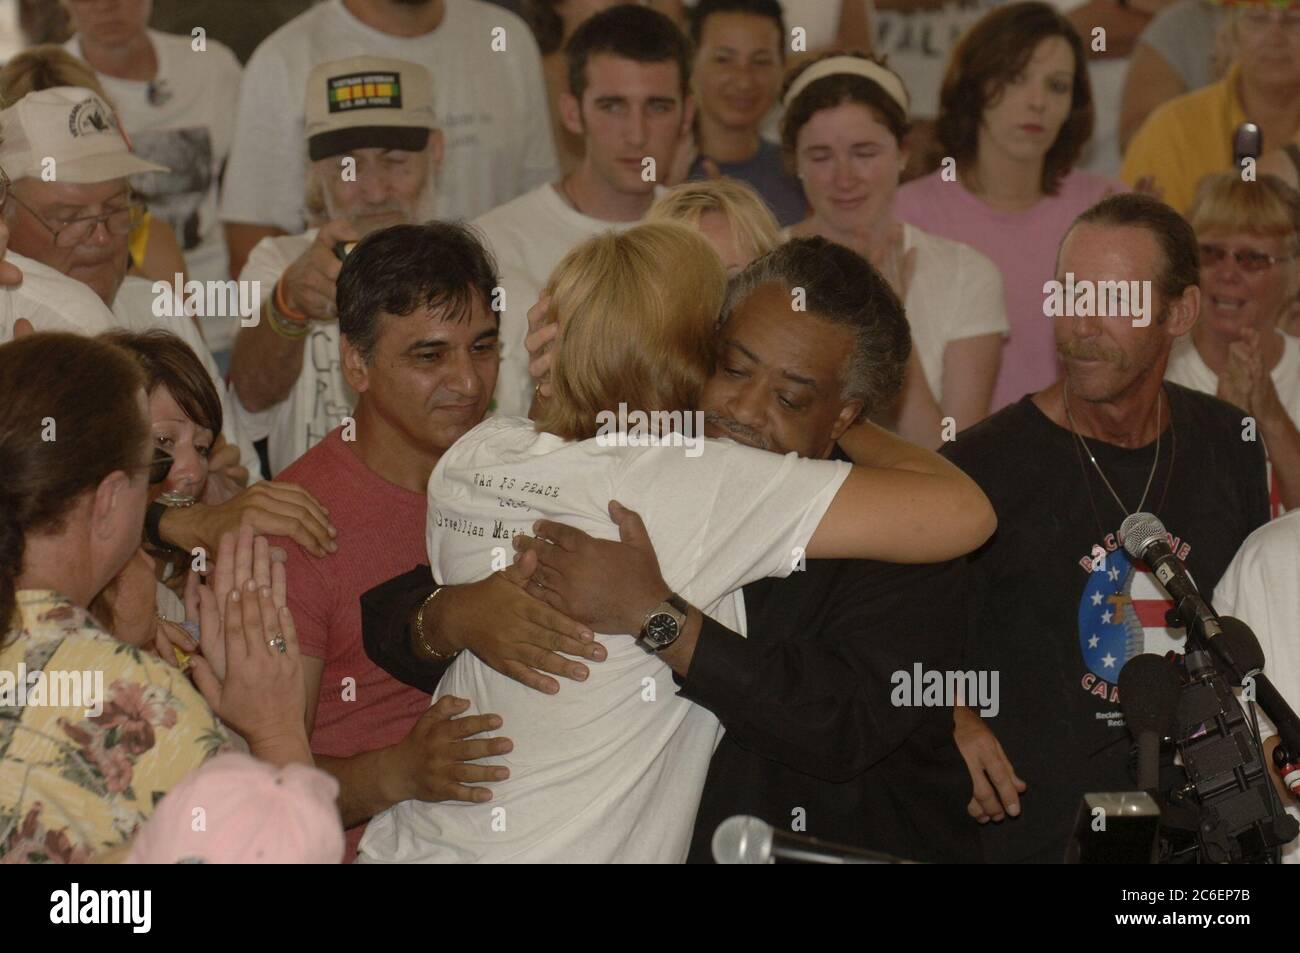 Crawford, Texas August 28, 2005: Anti-war activist Cindy Sheehan (left)) hugs Rev. Al Sharpton as Sharpton conducts a church service at Camp Casey II near U.S. President George W. Bush's Texas ranch.  Sheehan, whose son Casey died in action in Iraq in 2004, has organized a series of protests near the Bushes' Texas ranch during the president's summer vacation there.  ©Bob Daemmrich Stock Photo